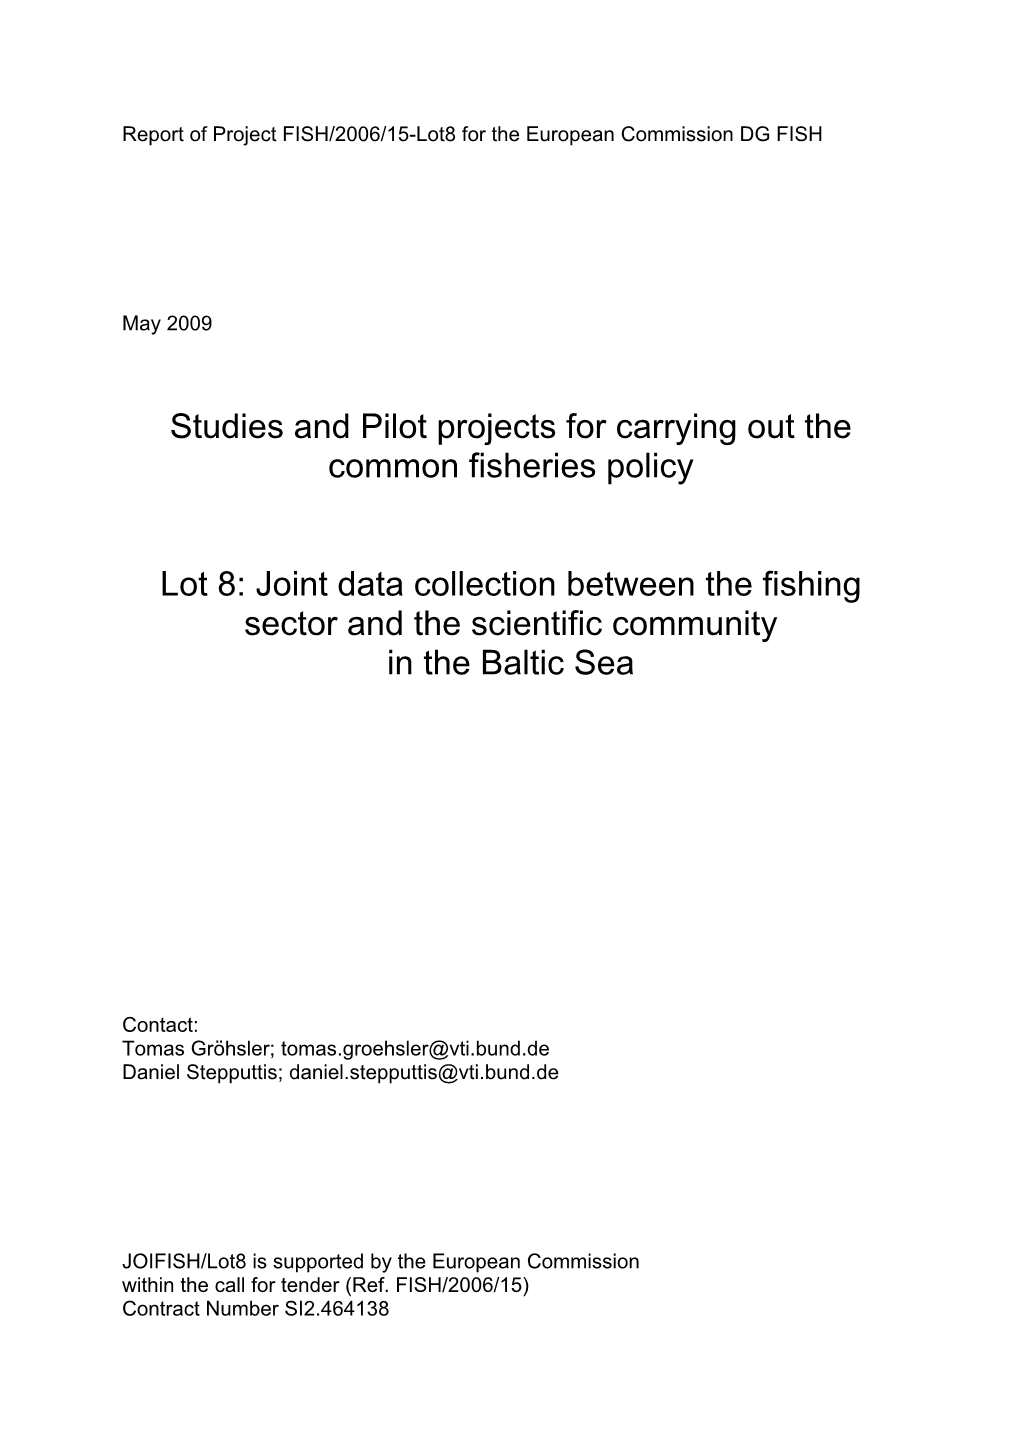 Studies and Pilot Projects for Carrying out the Common Fisheries Policy : Lot 8 ; Joint Data Collection Between the Fishing Sect